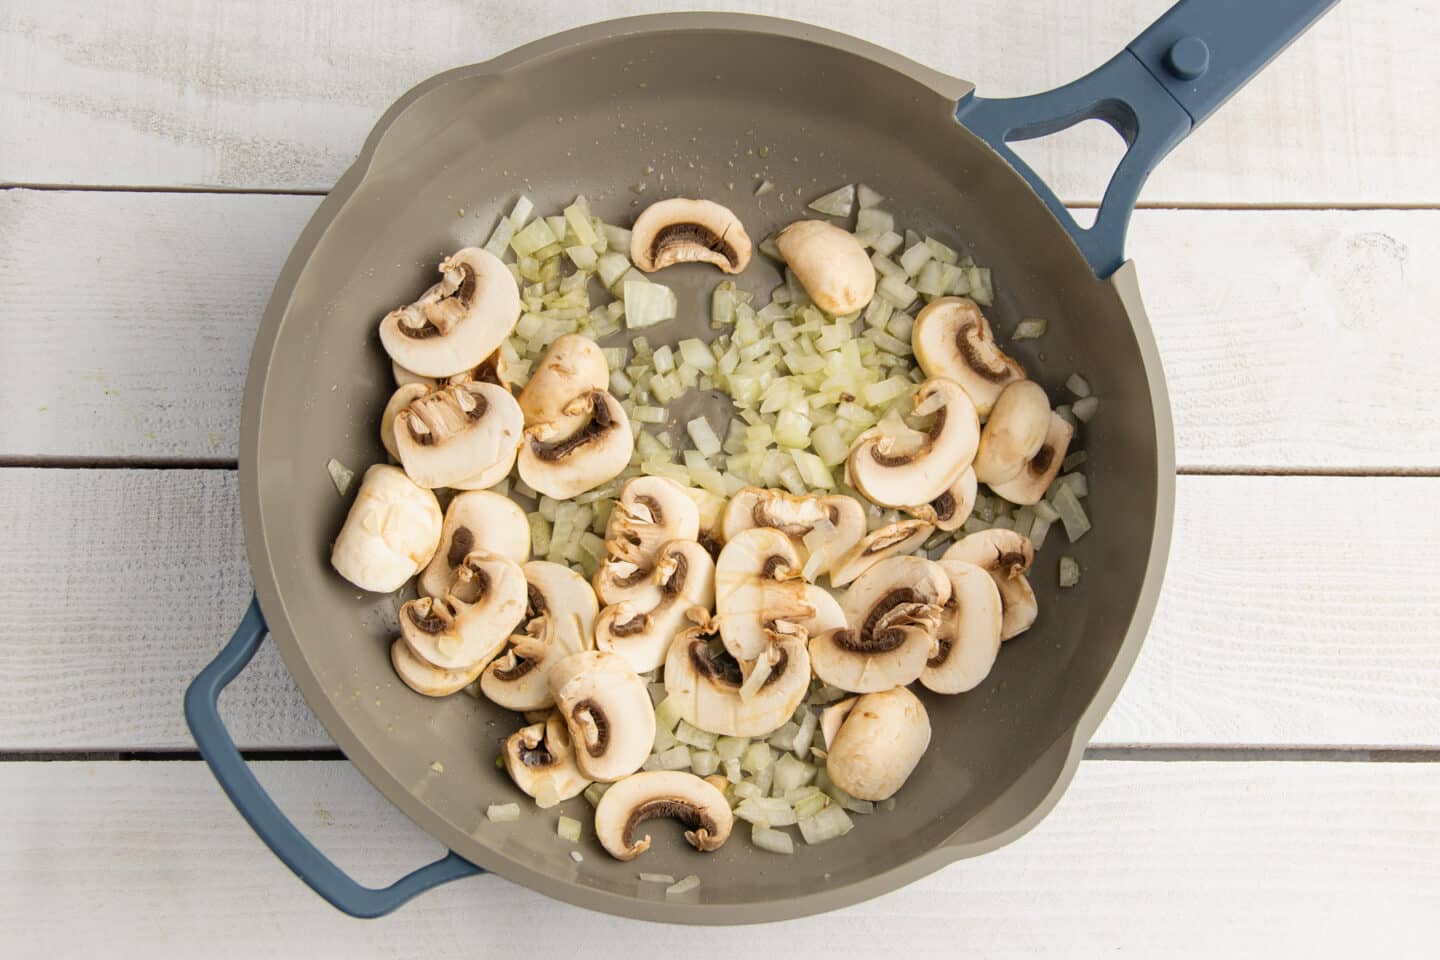 Picture of skillet with onion and mushrooms being cooked.